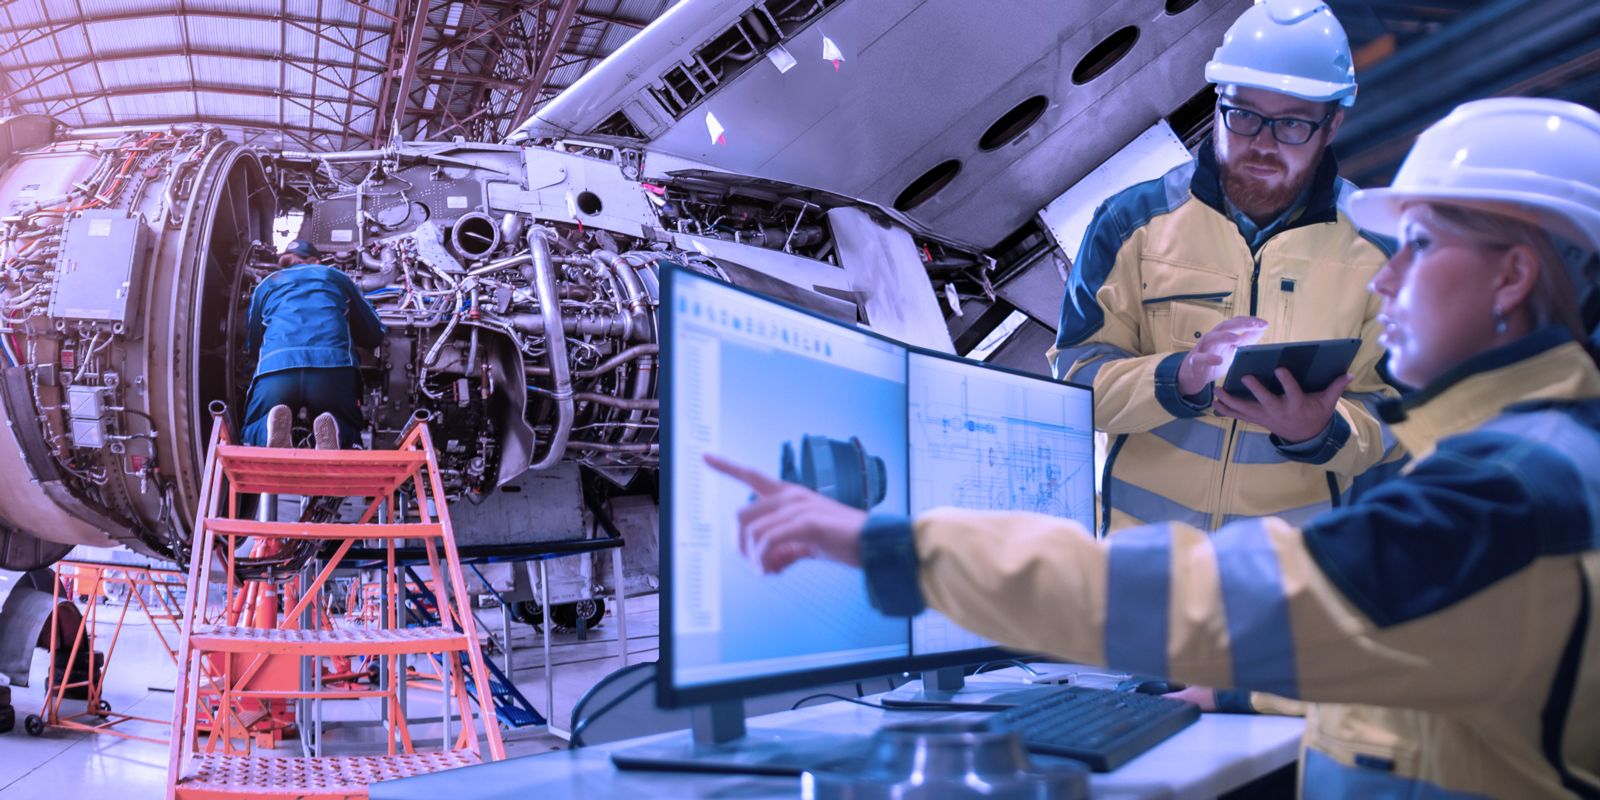 A mechanic works on an airplane engine while kneeling on an orange safety ladder. A male and a female engineer wearing yellow and black jackets and hardhats study plans on a computer monitor and tablet.